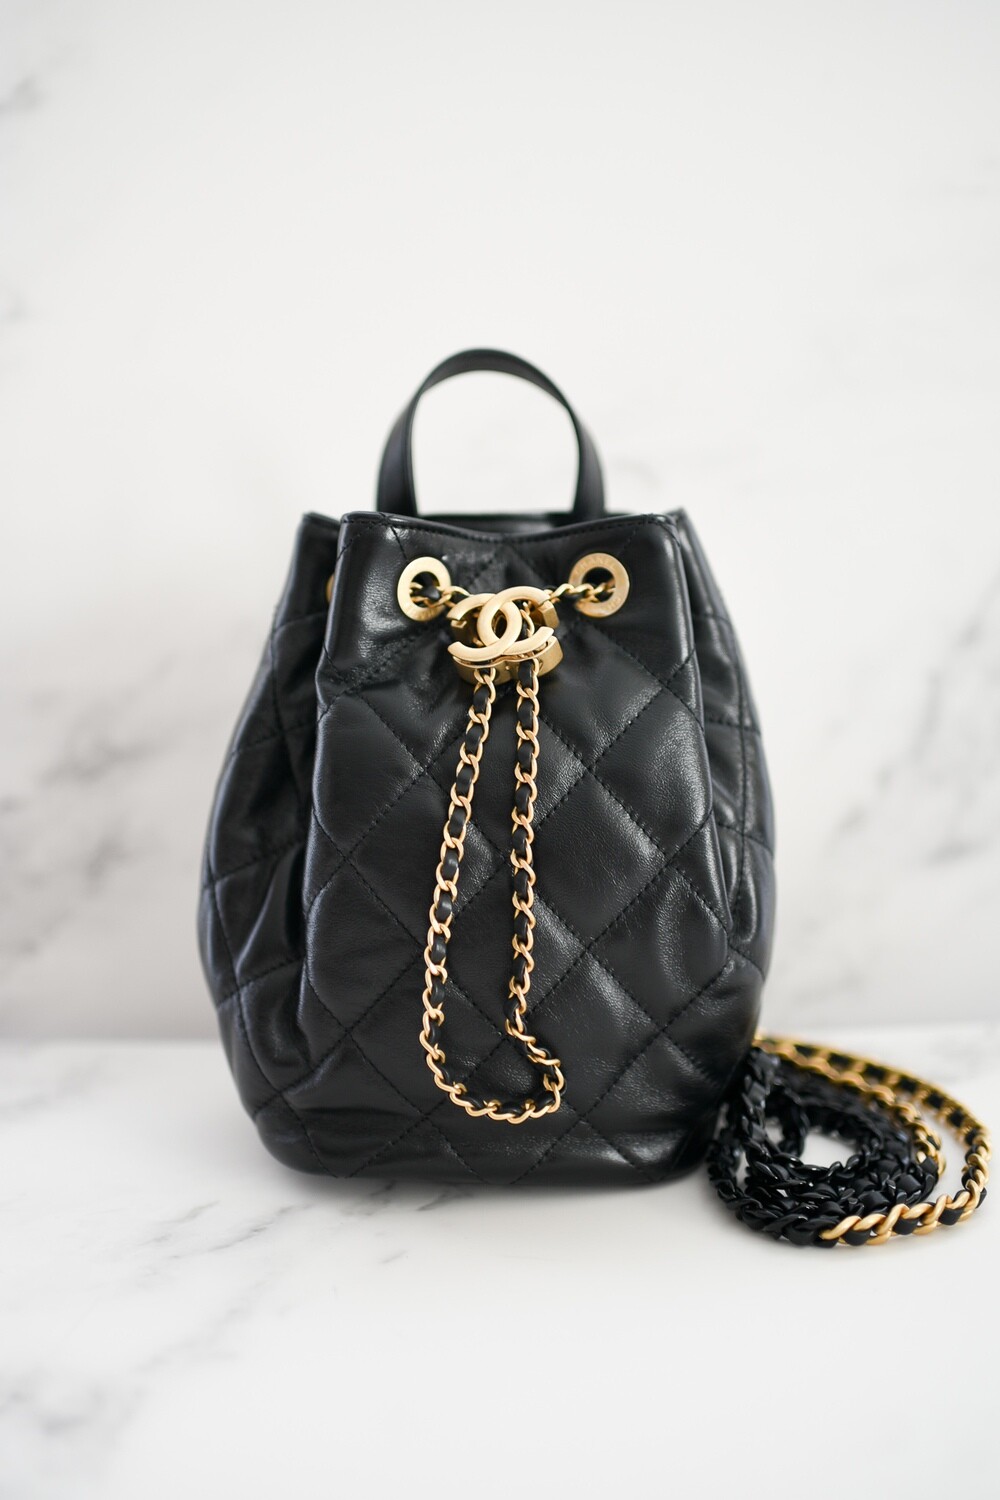 Chanel Drawstring Mini Backpack, Black Lambskin Leather with Gold and So  Black Hardware, As New in Box